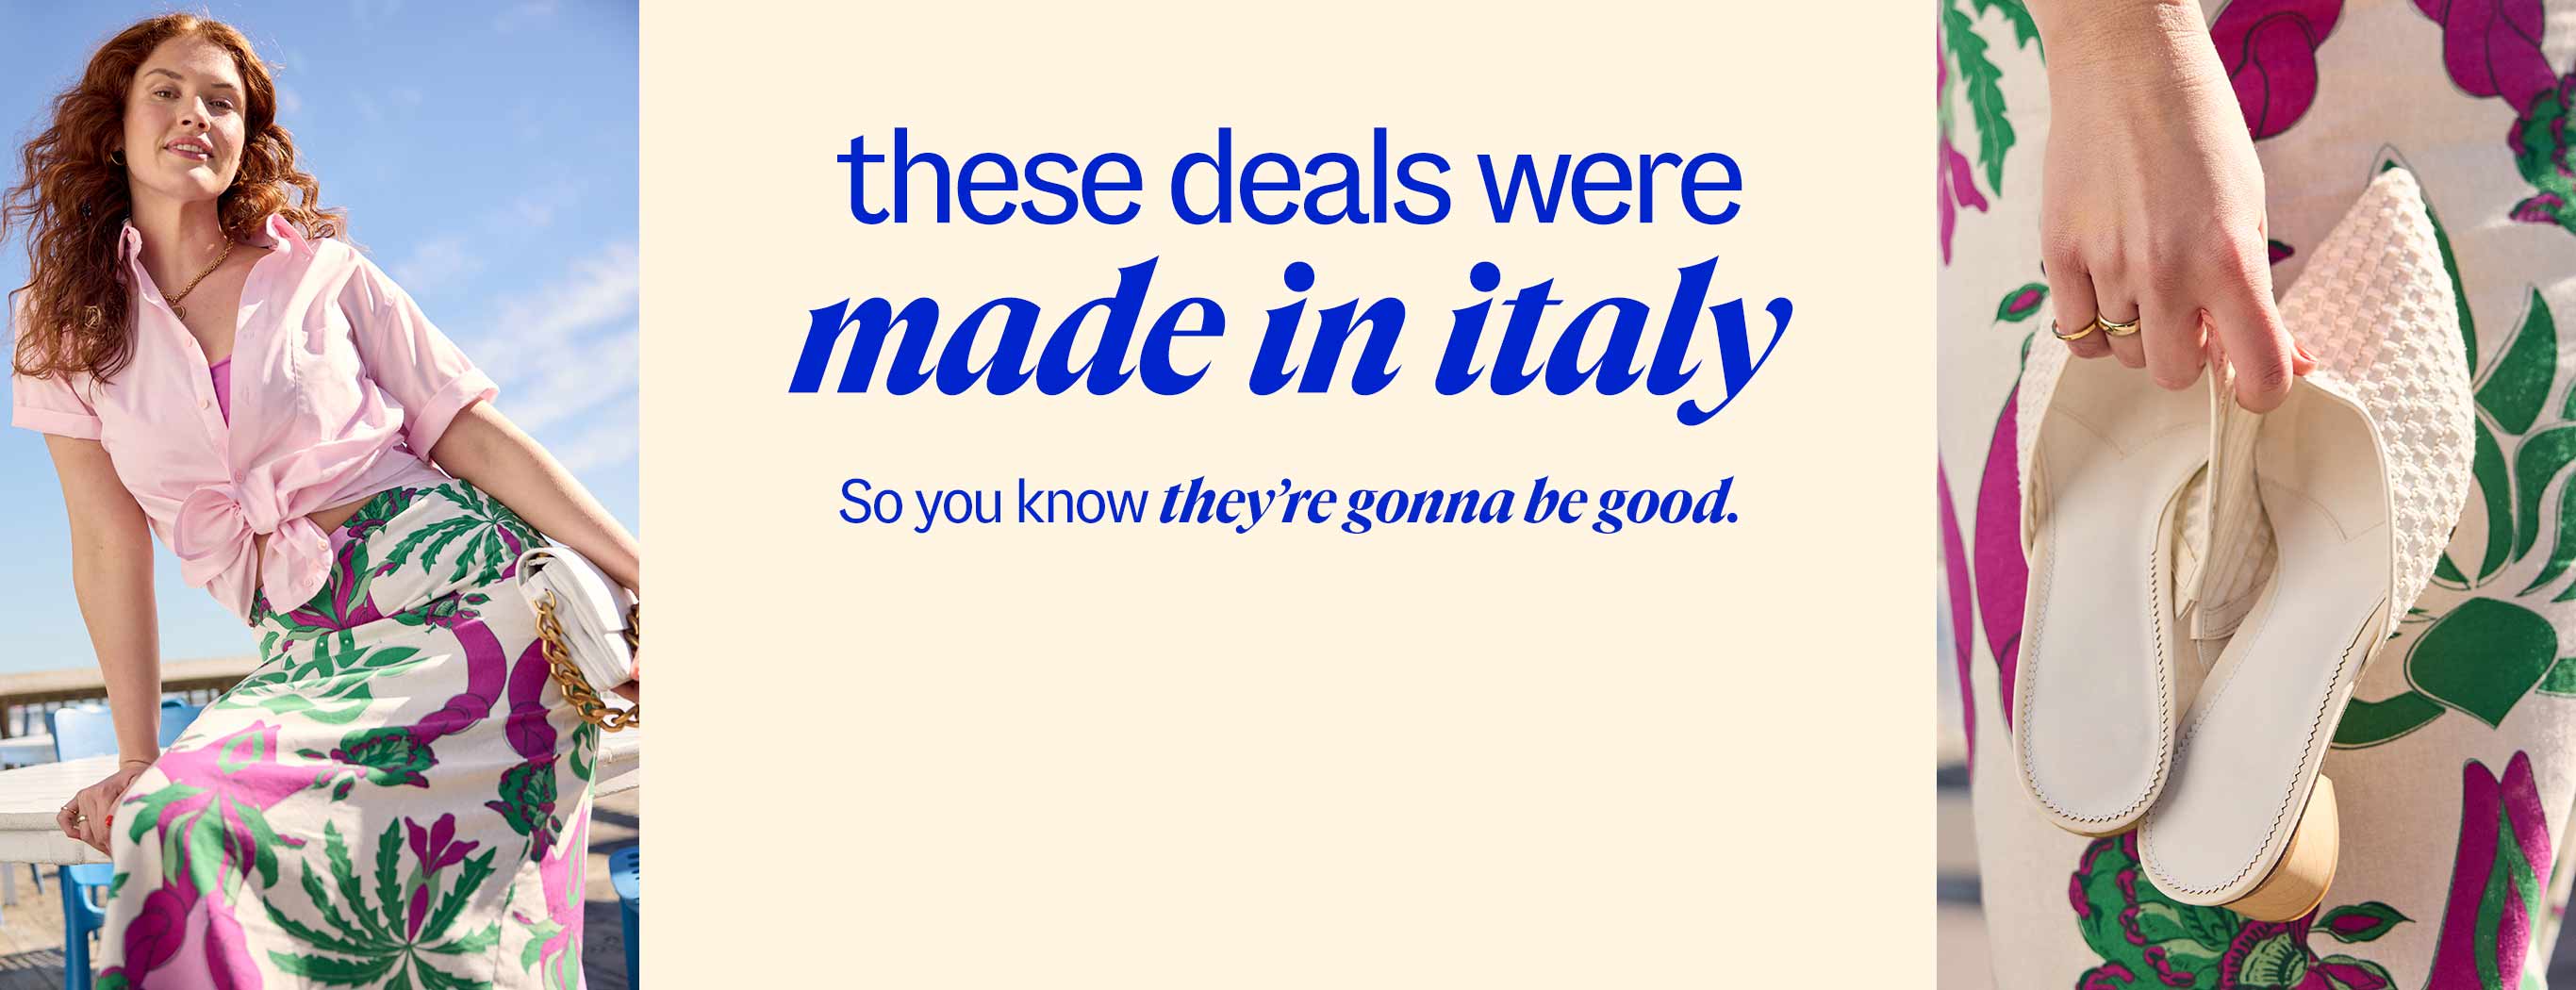 these deals were made in italy. So you know theyÃ¢ÂÂre gonna be good.